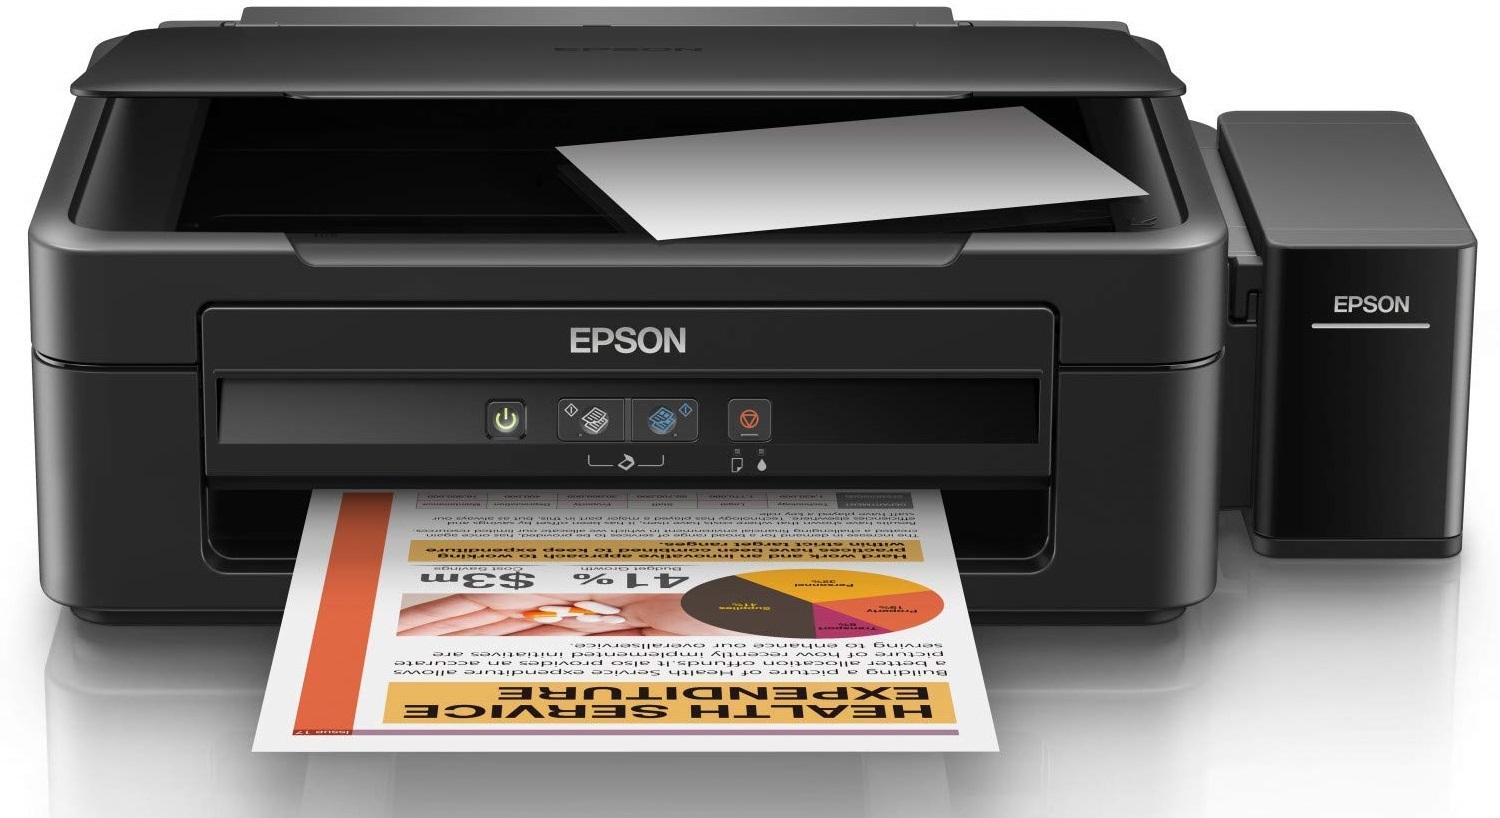 Epson L3210 Adjustment Program - Free Download for Easy Printer Customization and Maintenance